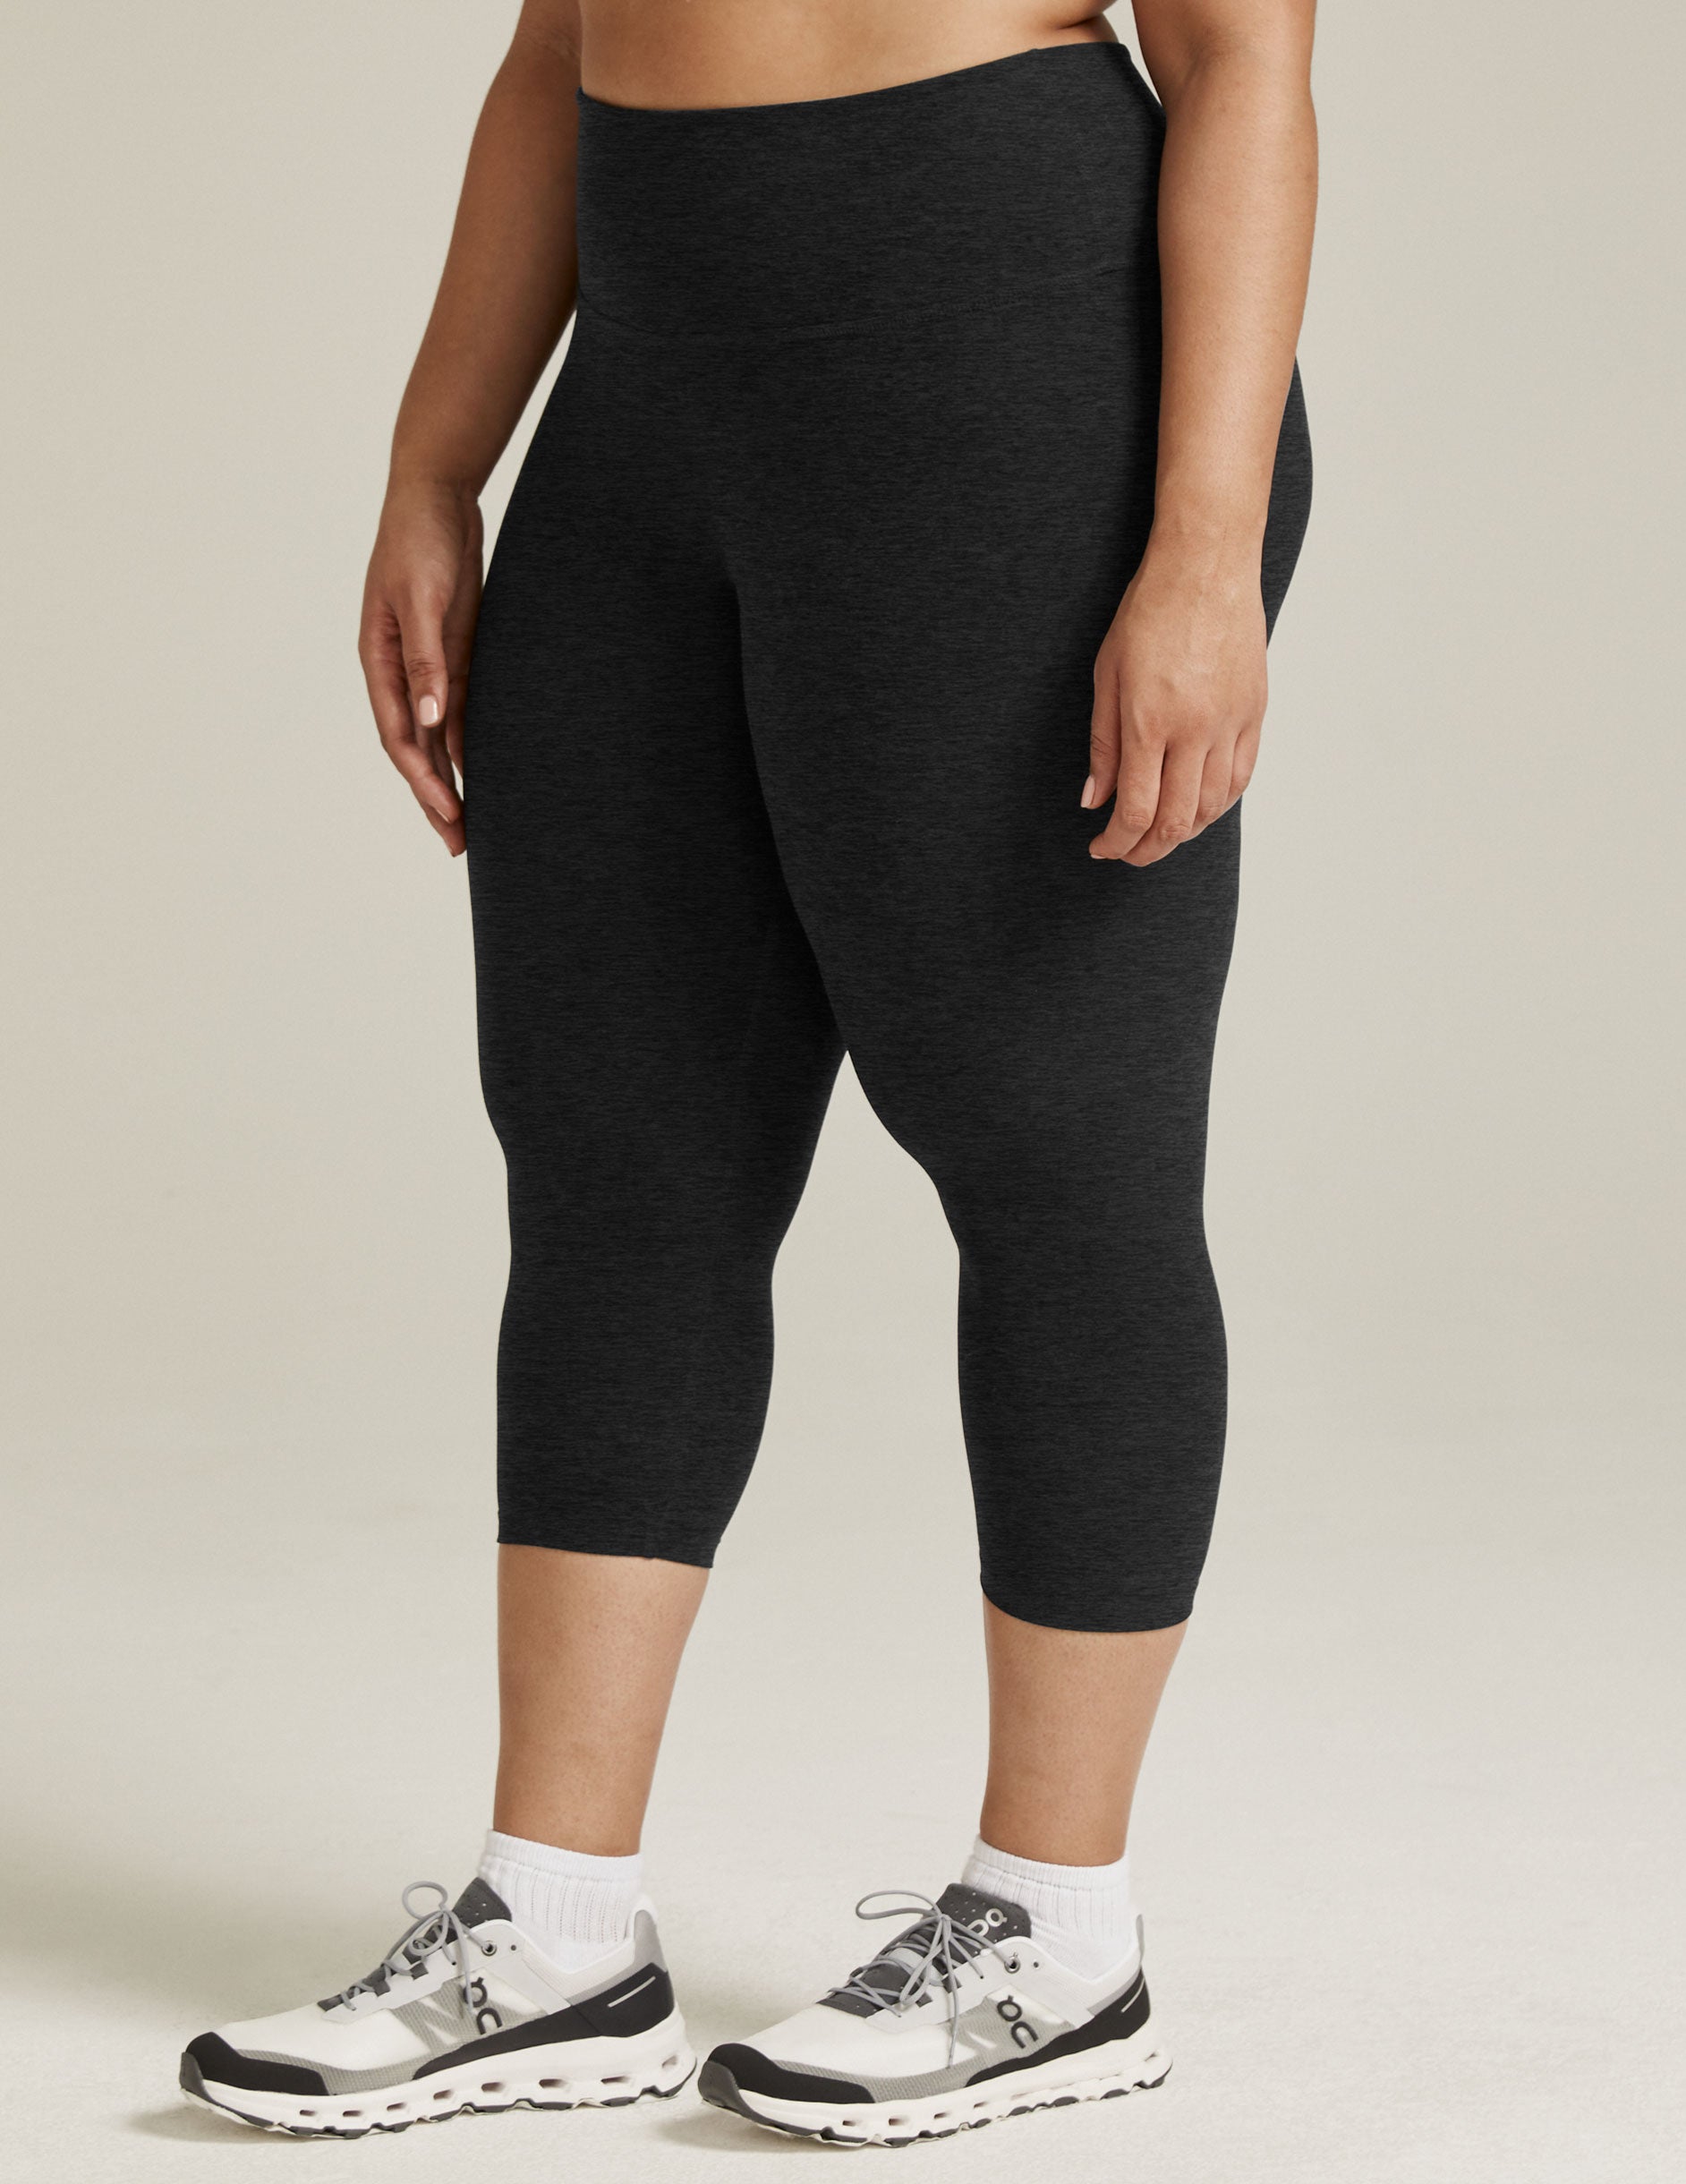 Fabletics Cabpri. Woman's Size Small 4-6. Waist 24, By Stretch's Some.  Black